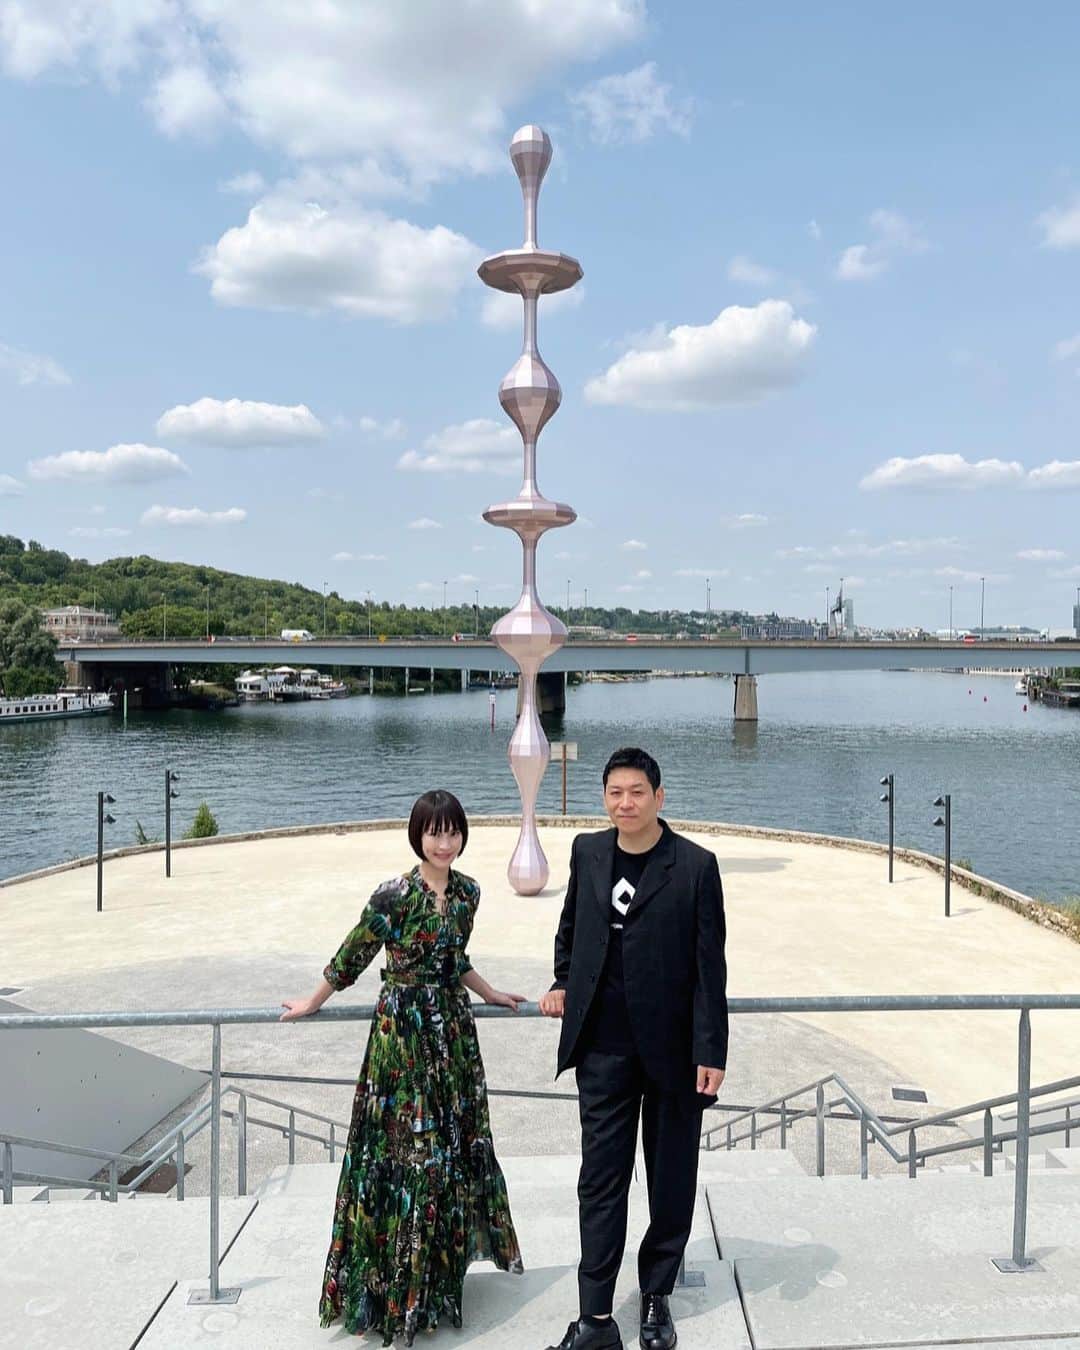 清川あさみのインスタグラム：「PARIS.🇫🇷  My husband Kohei 's largest ever sculpture "Ether (Equality) We were there for a short while to attend the unveiling of the sculpture on the Seine River in France .  It took long time since Kohei started to realize this project. Thank you for your hard work. This work, with its universal motifs of water and gravity, seems to balance various problems in the world.  We will definitely visit the Louvre and other places with our family again. Next time I will bring my children and visit again after a long time.  Next month, I will be unveiling a public art of mine in Japan. I am looking forward to it.  Ether (Equality) is to be unveiled soon.  Courtesy of SCAI THE BATHHOUSE and Pace Gallery @scaithebathhouse @pacegallery   フランス・パリ近郊のセーヌ川の中州、セガン島の先端に位置するモニュメントとして夫の大型彫刻作品が完成し公開式典が28日開かれ参加してきました。  沢山のパリの関係者や沢山の友人も来てくださり素敵な時間になりました。  「Ether（Equality)」は世界の様々な問題のバランスをとっているかのようでした。  この話が来てから実現するまで時間がかかったので、無事に完成してよかったです。  お疲れ様でございました！  ルーヴルでの発表以来のparisで、その時はお腹に次男がいて、長男が二歳頃だったのですが、深い思い出が沢山ある場所です。弾丸でしかたがまた家族で必ず訪れる場所が増えました。次回は子供達も連れて久々に来ようと思います。  実は来月は私も日本で大きなパブリック作品がお披露目されます。こちらも楽しみ。  with @hautsdeseine and @danae.io #koheinawa @nawa_kohei  #名和晃平 #ileseguin #hautsdeseine #seinedepartment #asamikiyokawa #セーヌ川 #パブリックアート」